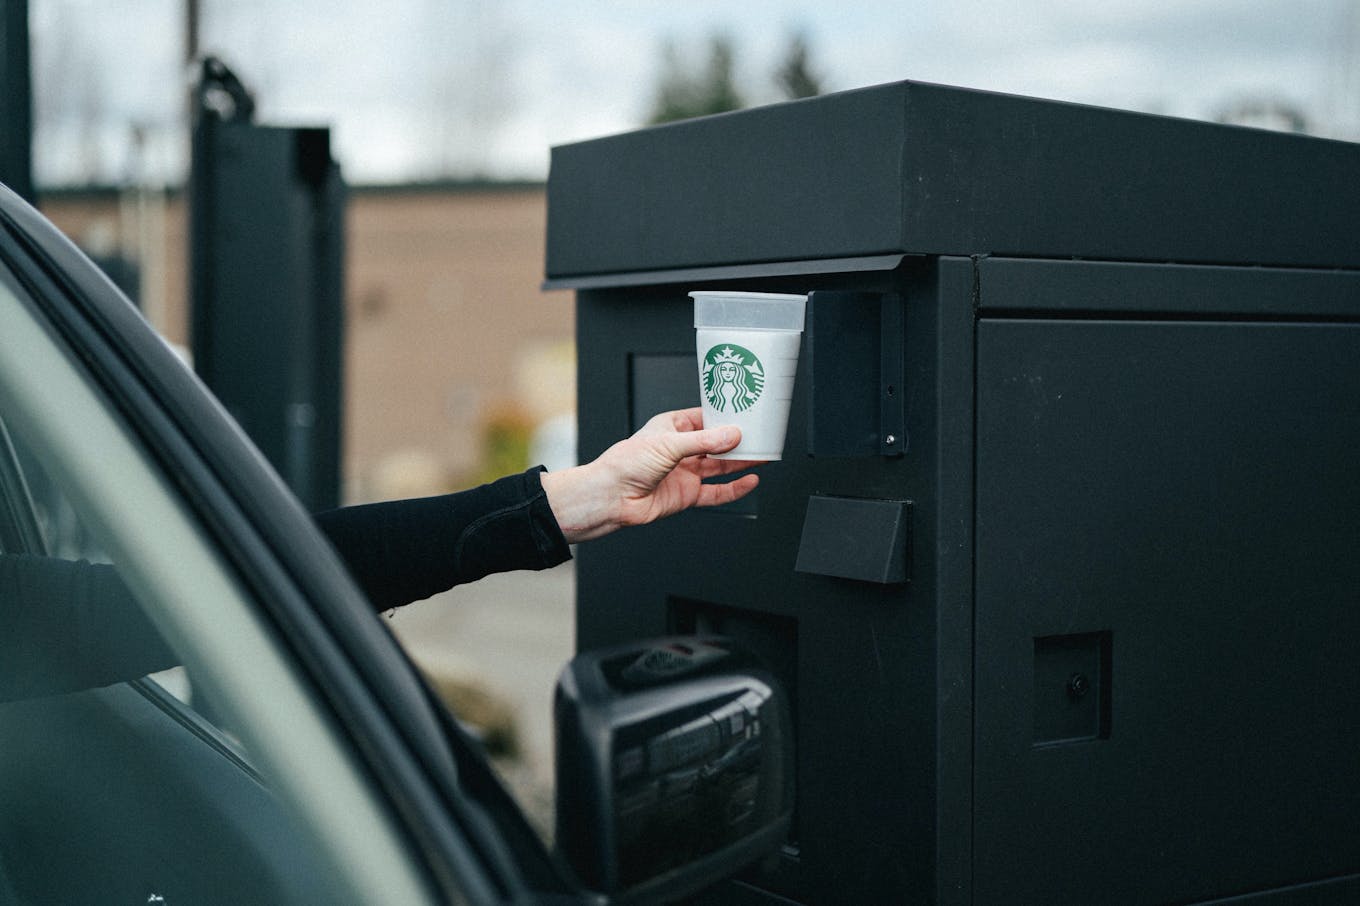 Starbucks Pledges Reusable Cups at Every Location by 2025